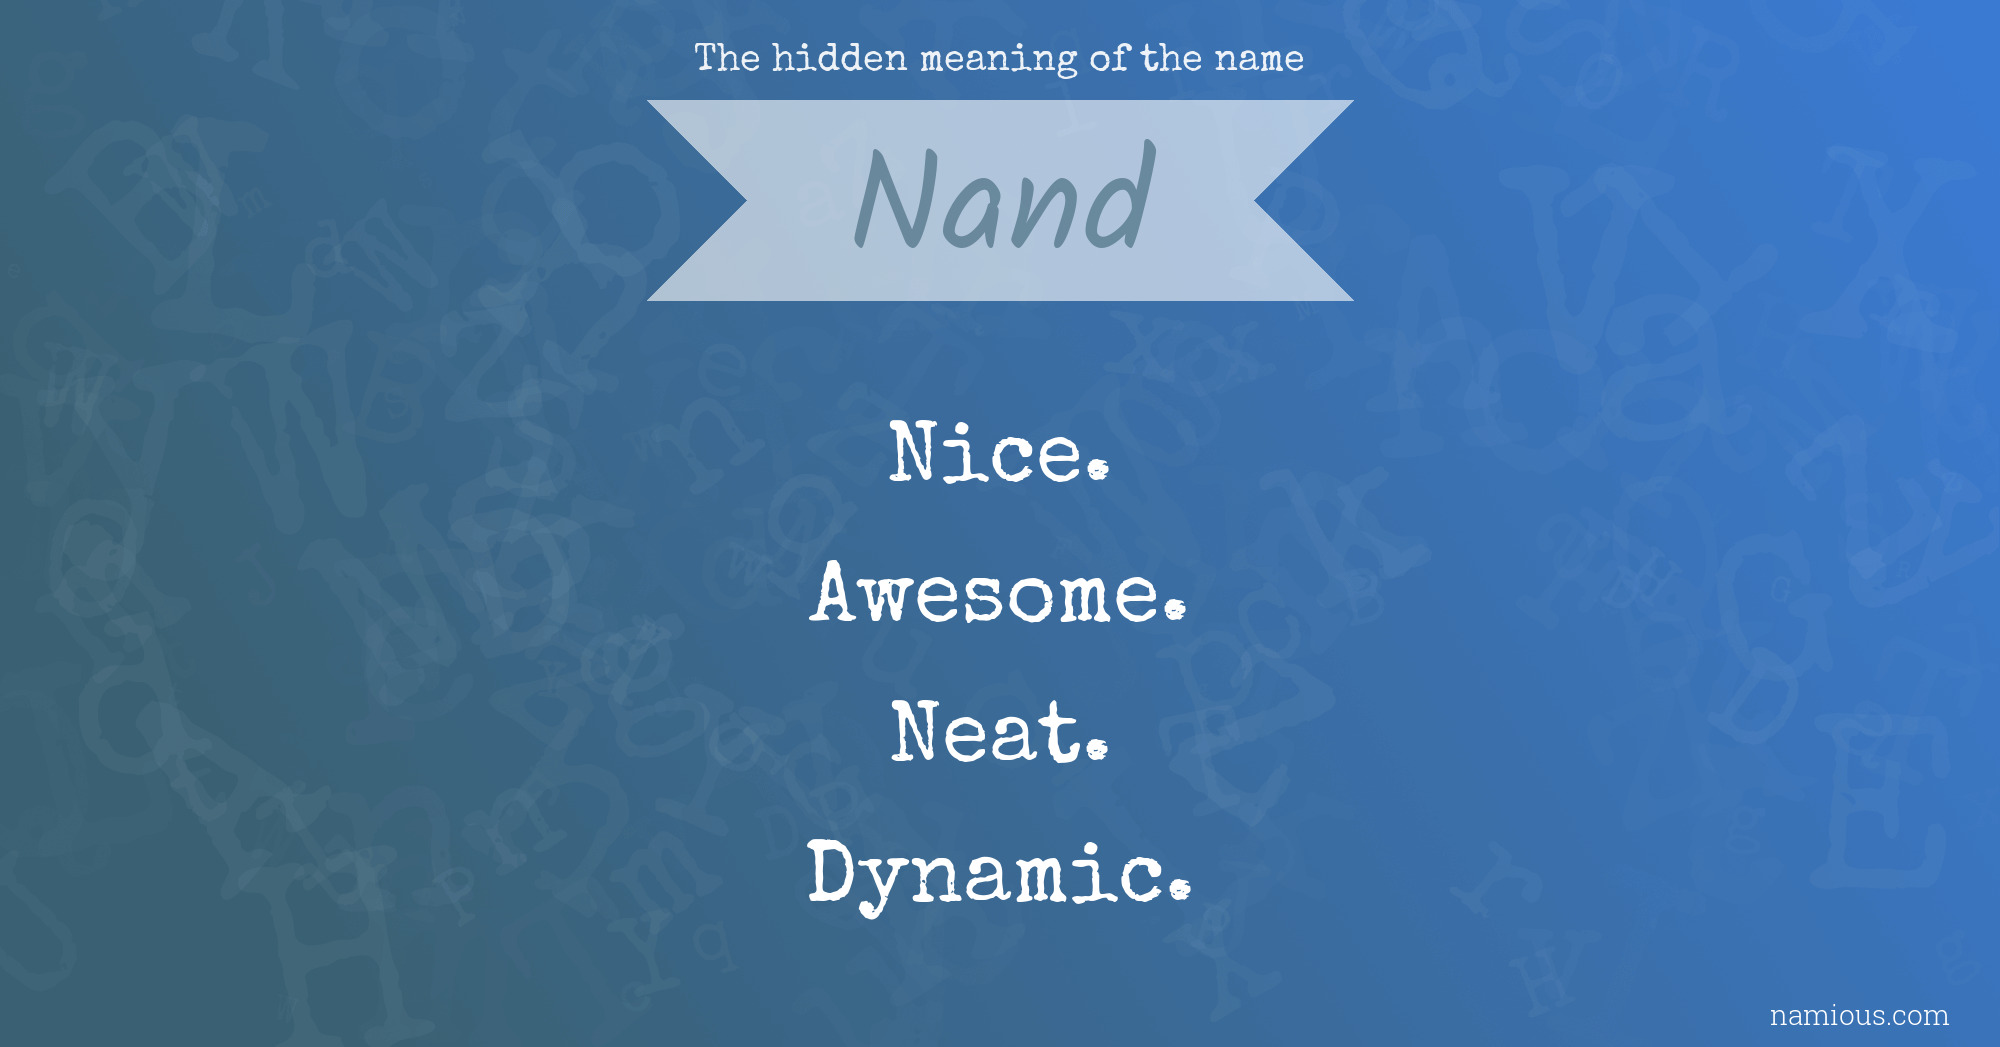 The hidden meaning of the name Nand